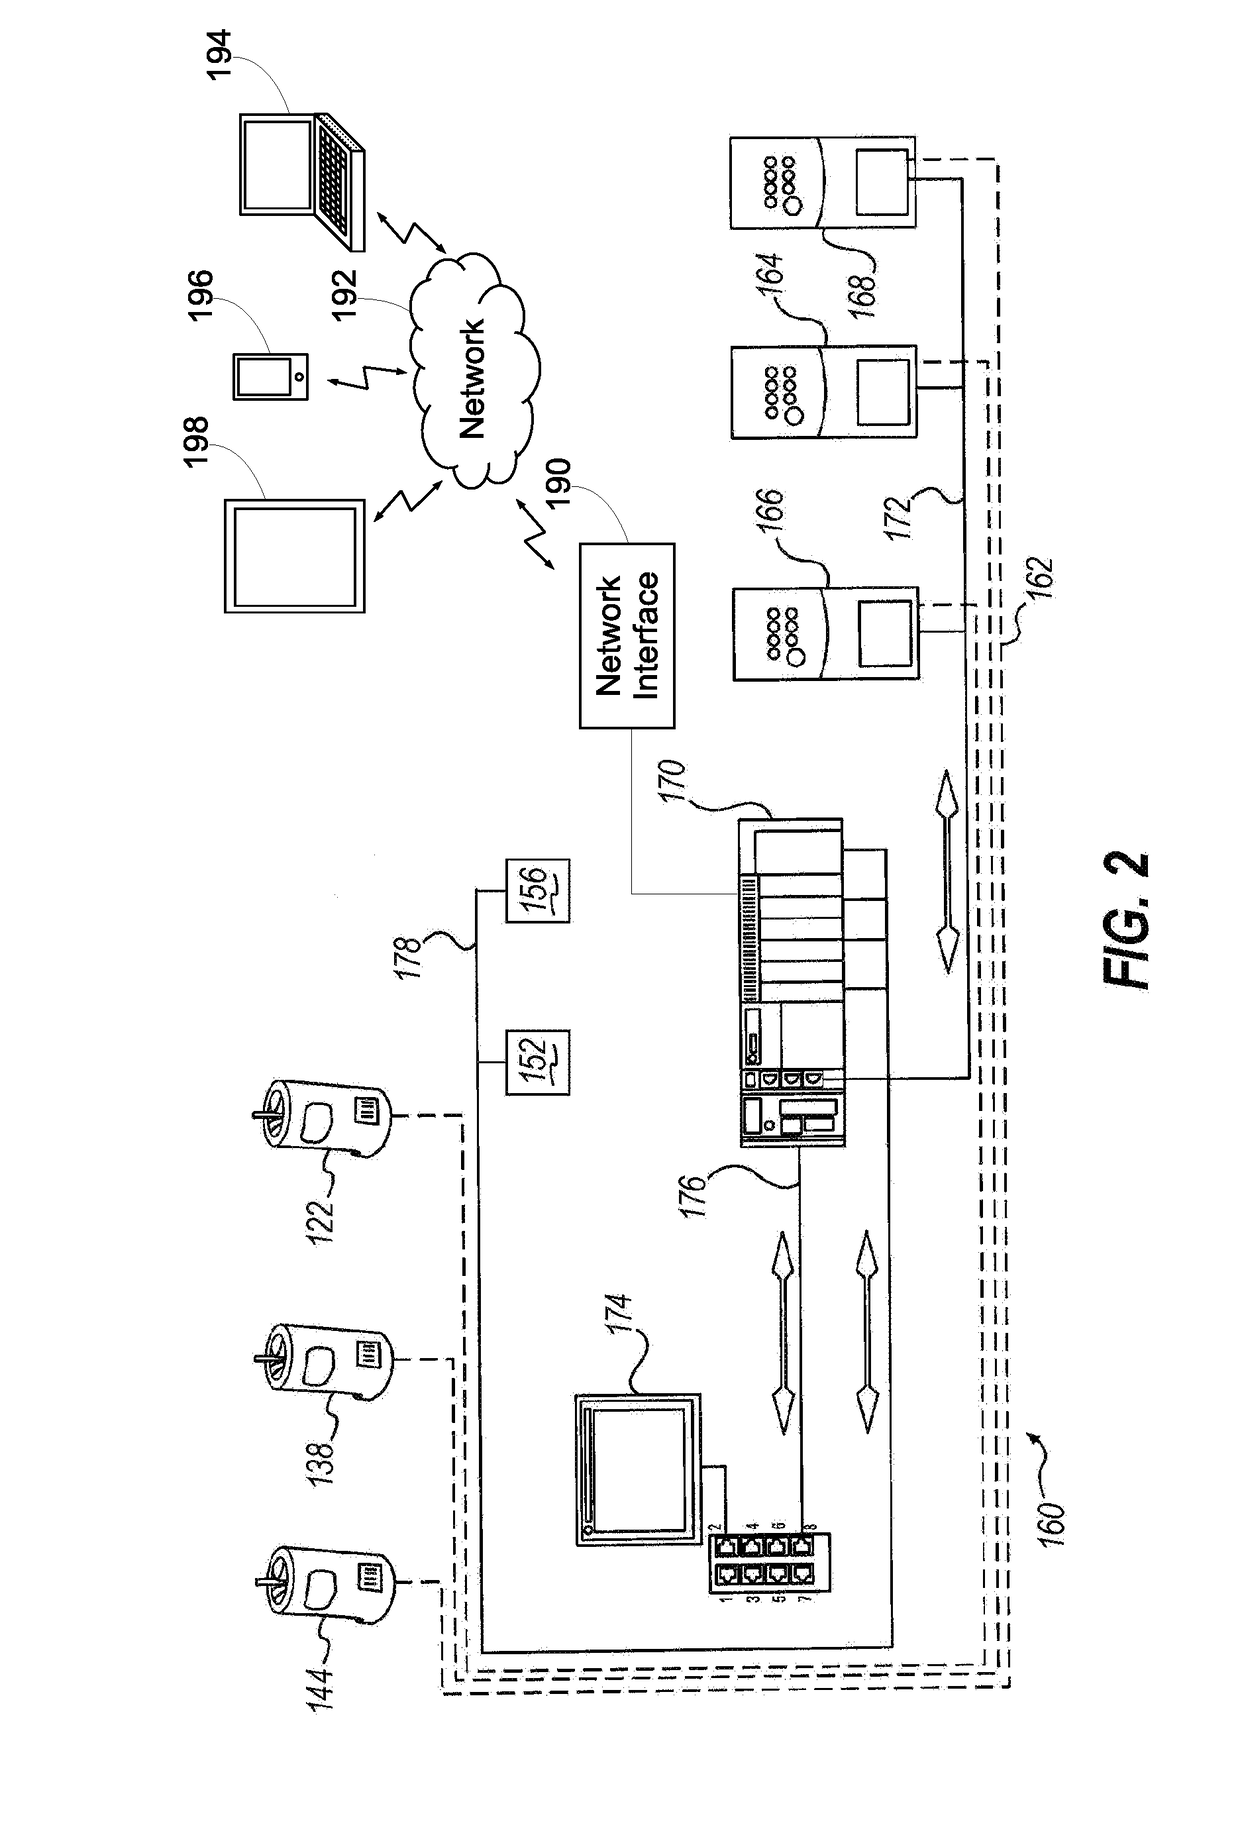 Stretch Wrapping machine Supporting Top Layer Containment Operations